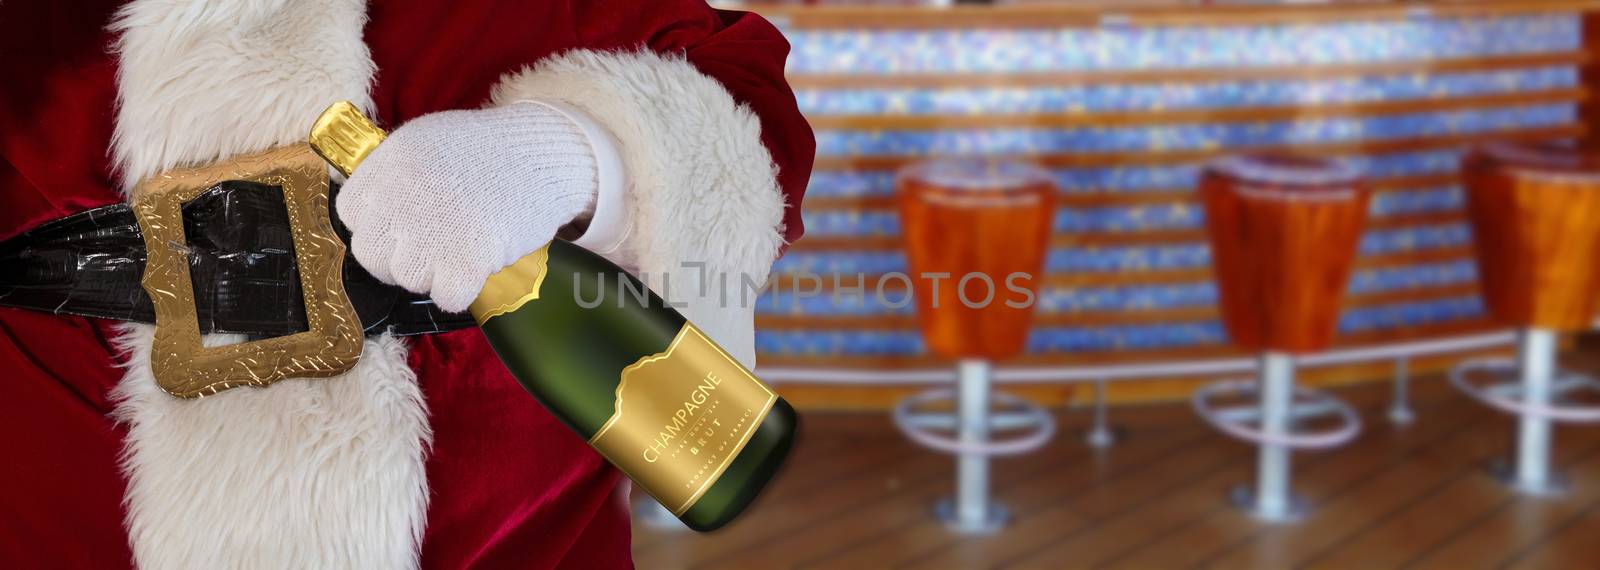 merry christmas Santa Claus holding a champagne bottle at the pub with bar and chairs background